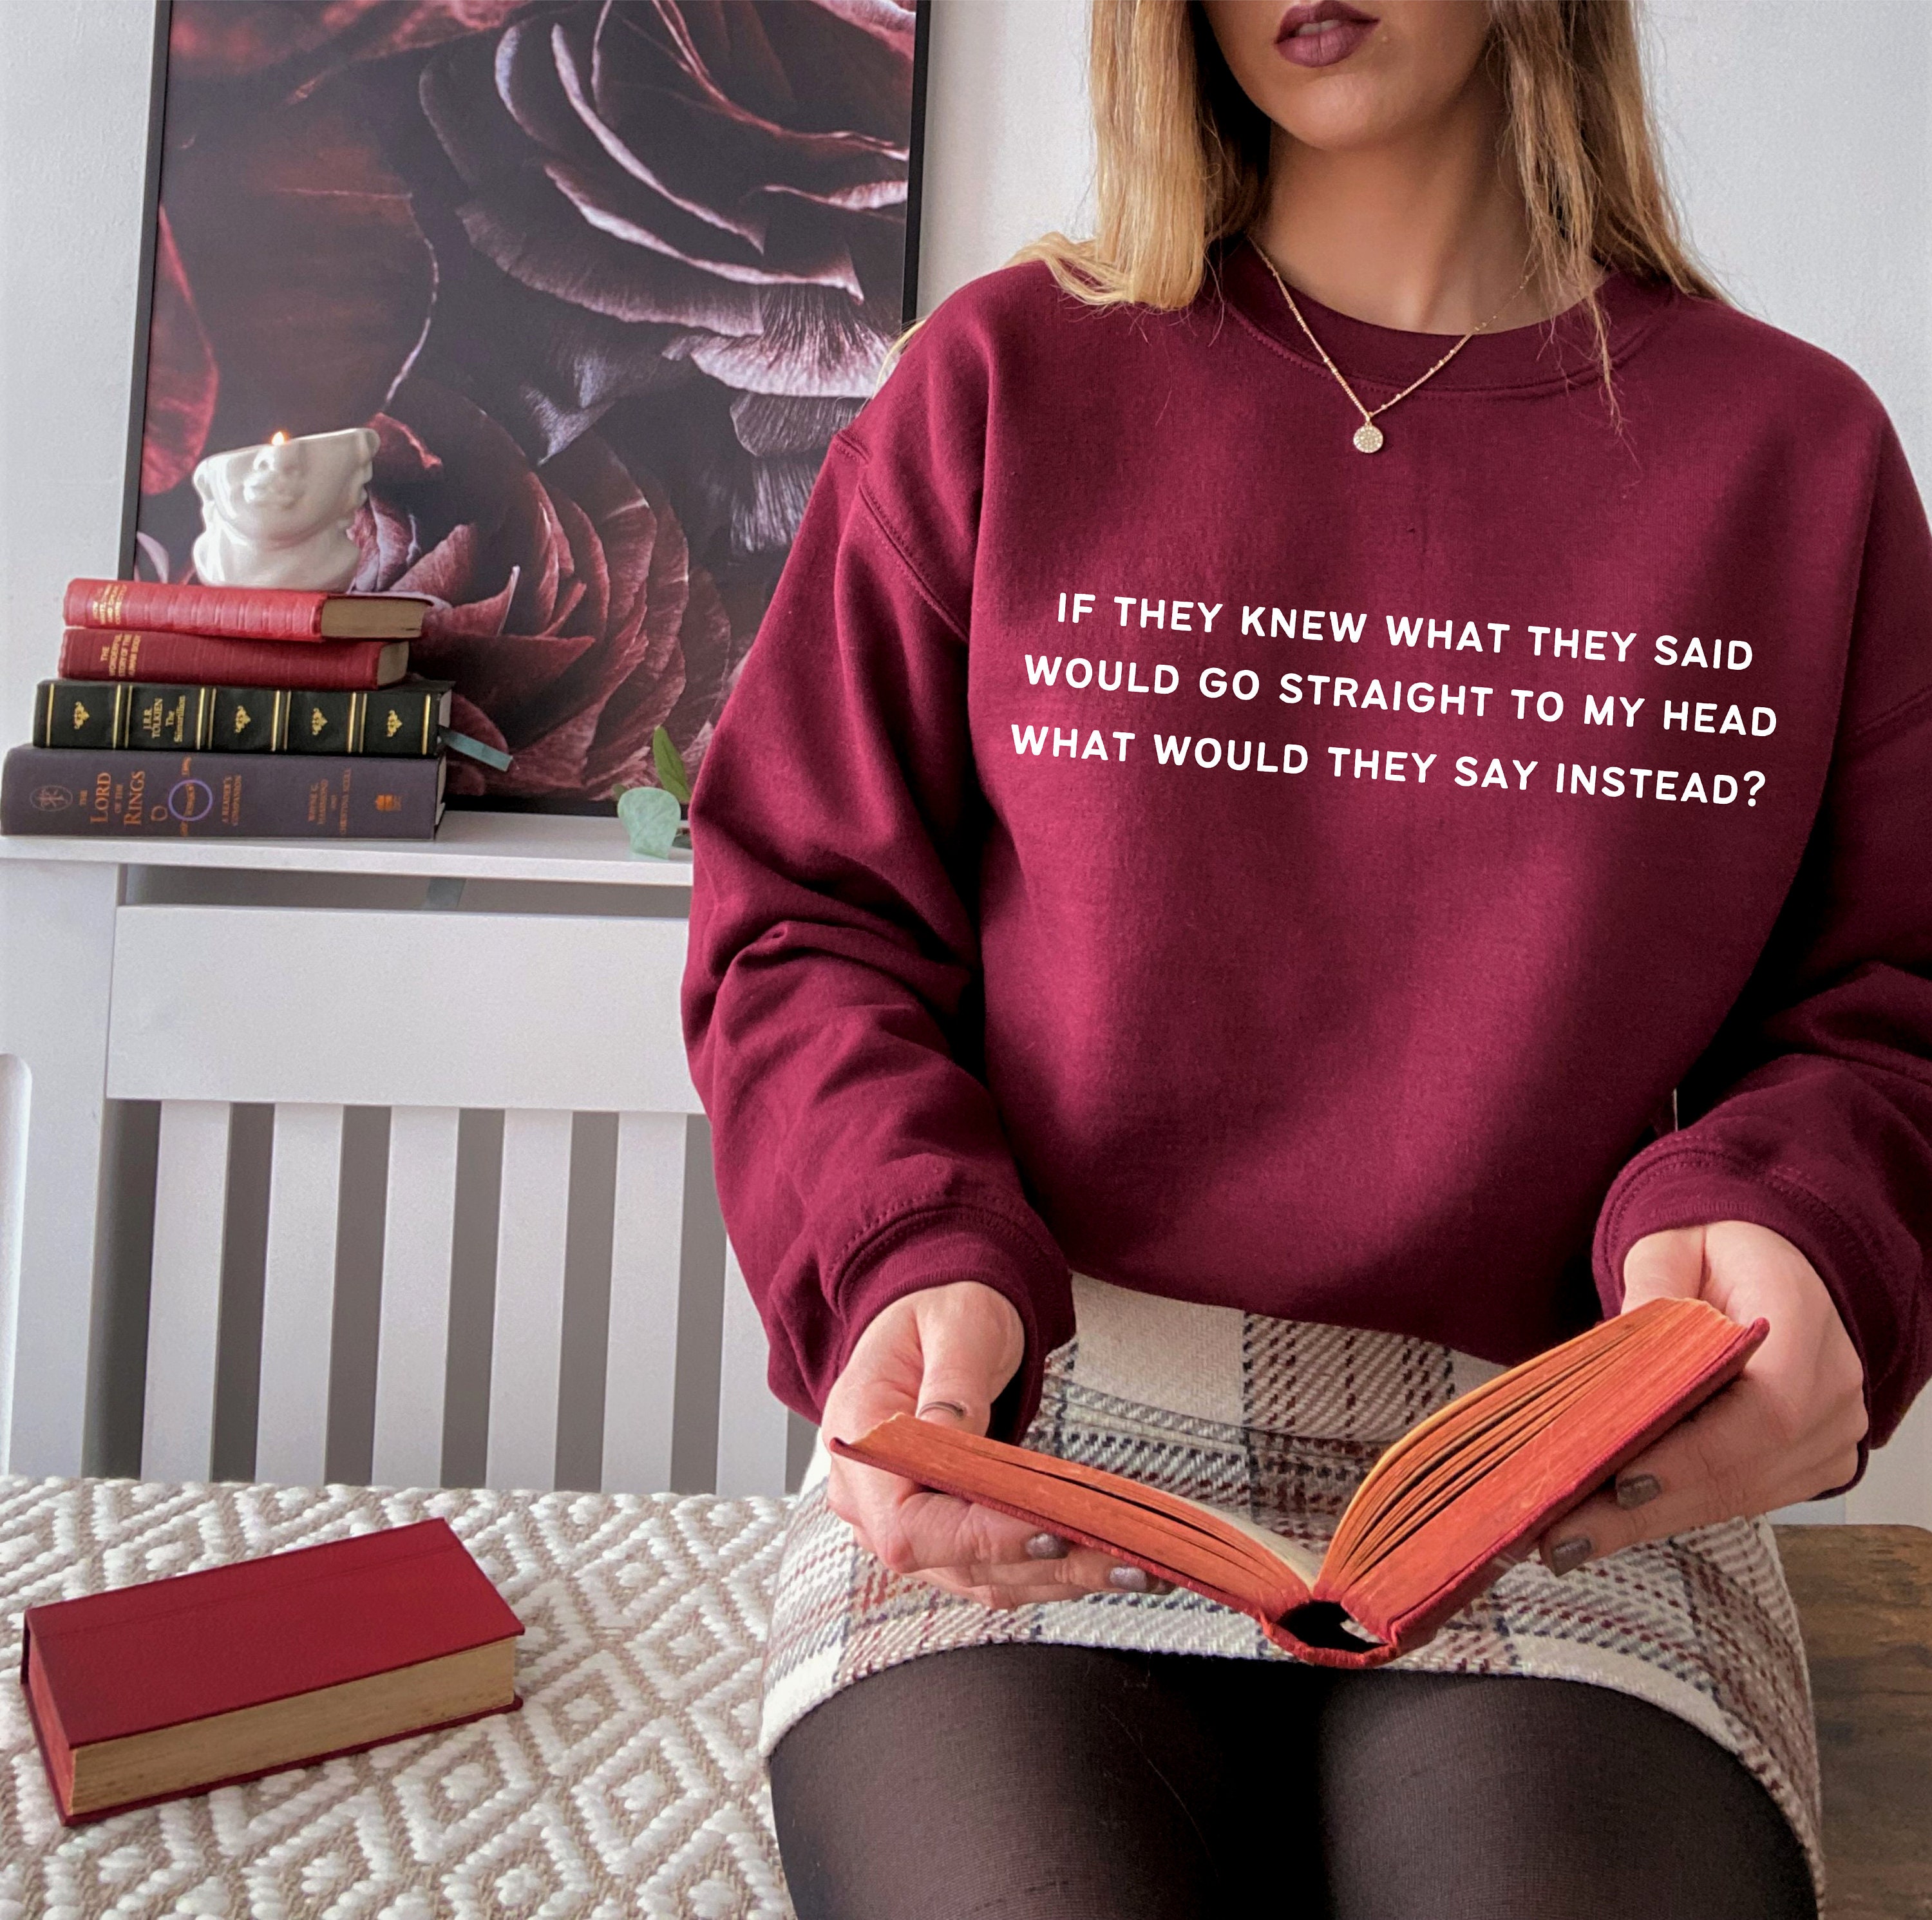 Handle With Care Sweatshirt, Fragile Crewneck, VSCO Tumblr Trend, Cool Cozy  Pullover Gift for Her, Valentine's Day Gift, Aesthetic Clothing 